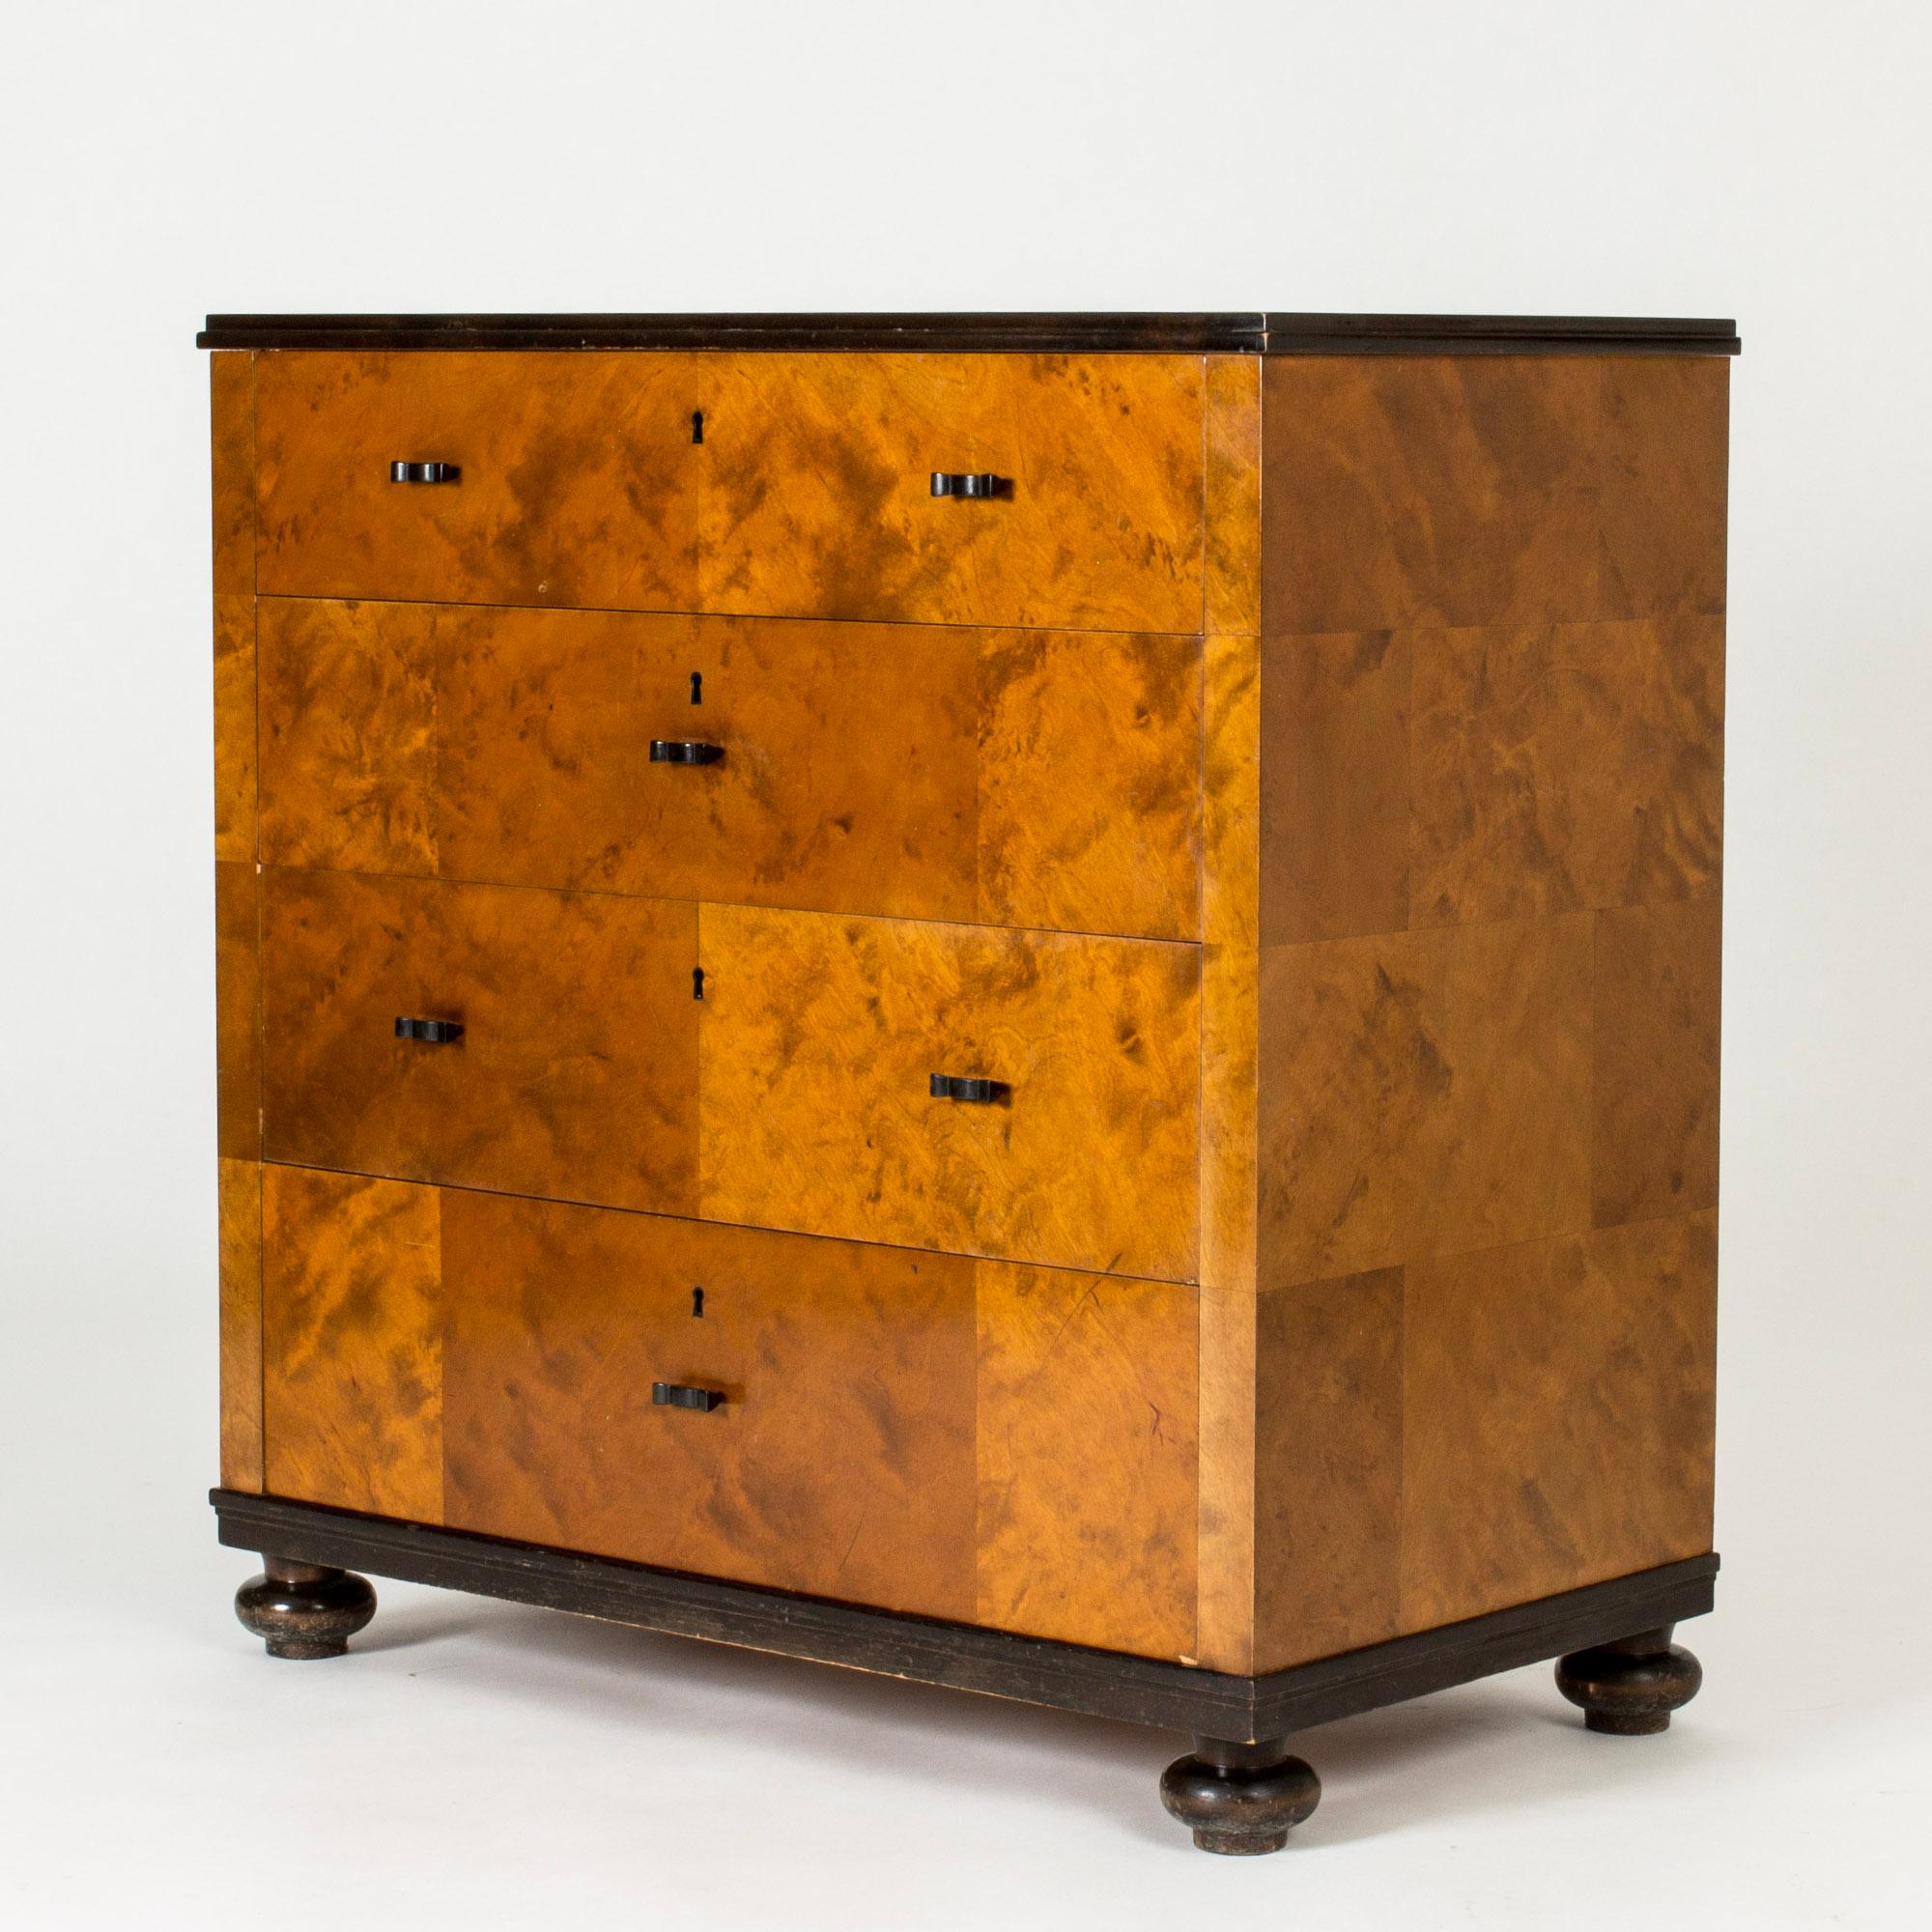 Elegant “Haga” chest of drawers by Carl Malmsten, made with stained birch veneer laid in a discreet pattern. Black painted legs and table top. Adorable handles in the form of crowns.